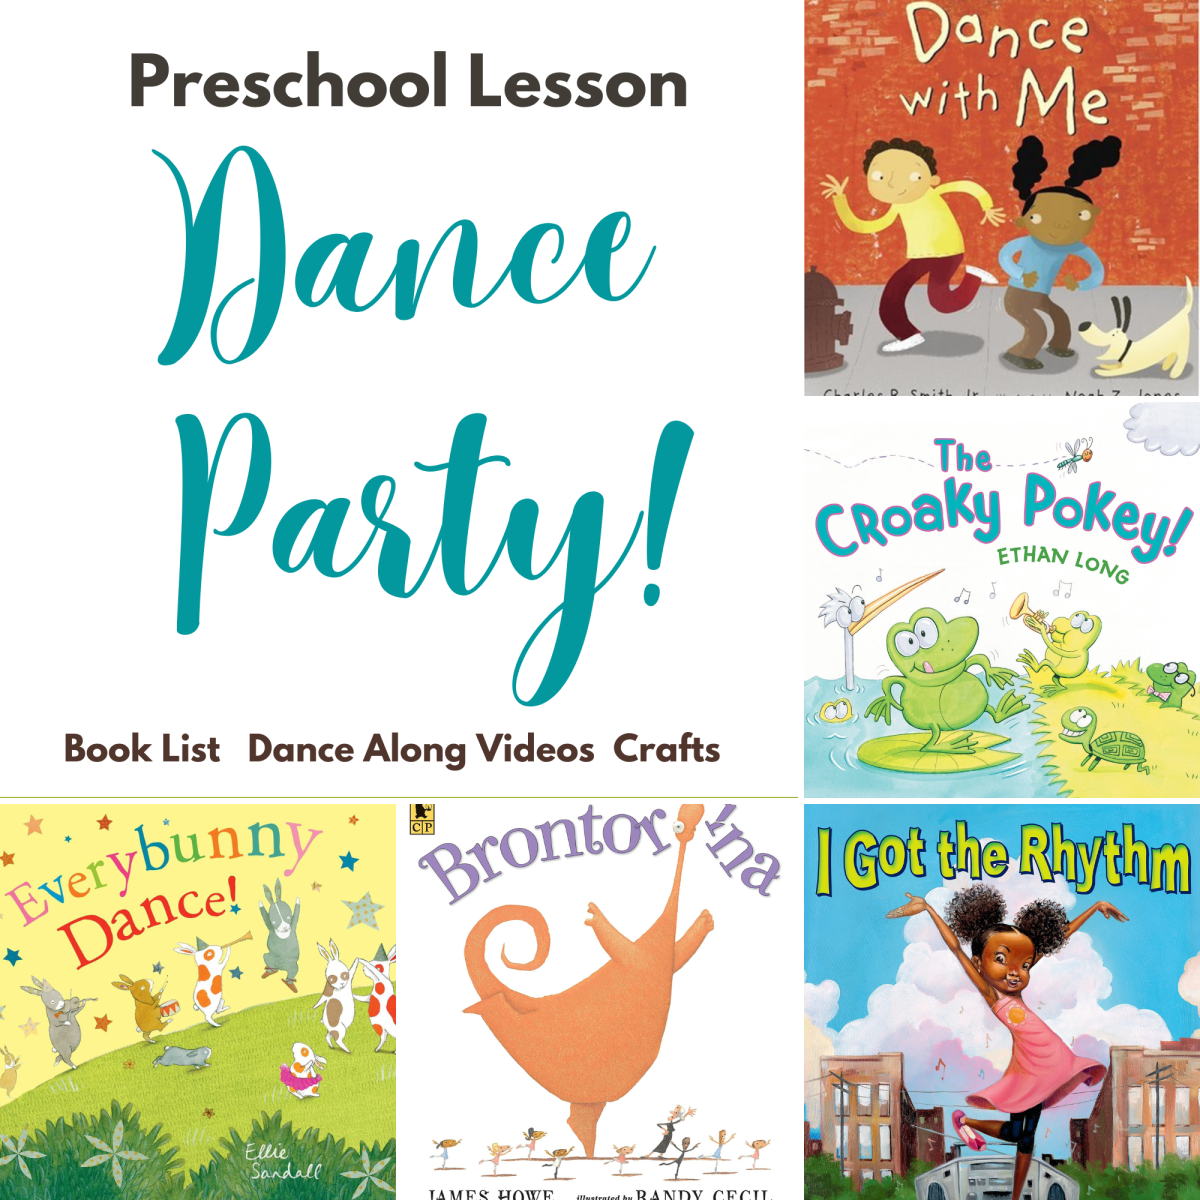 Dance Party! Preschool Lesson. Everything you need here to pull it together.